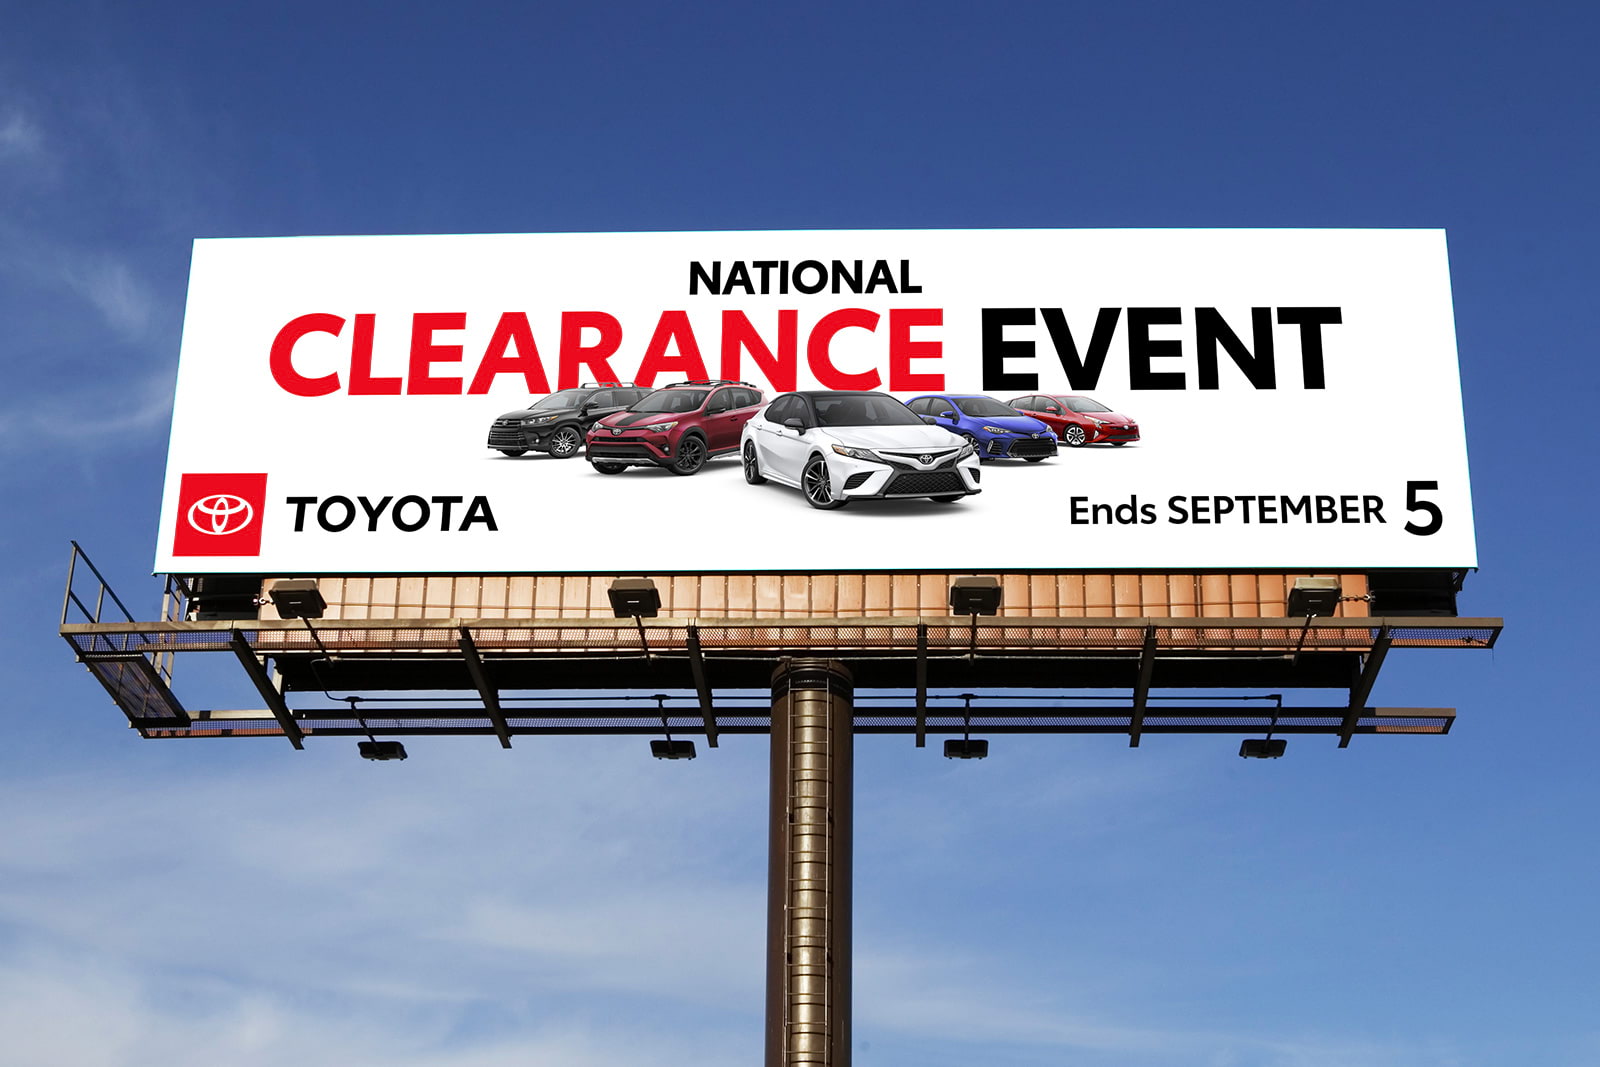 National Clearance Event billboard